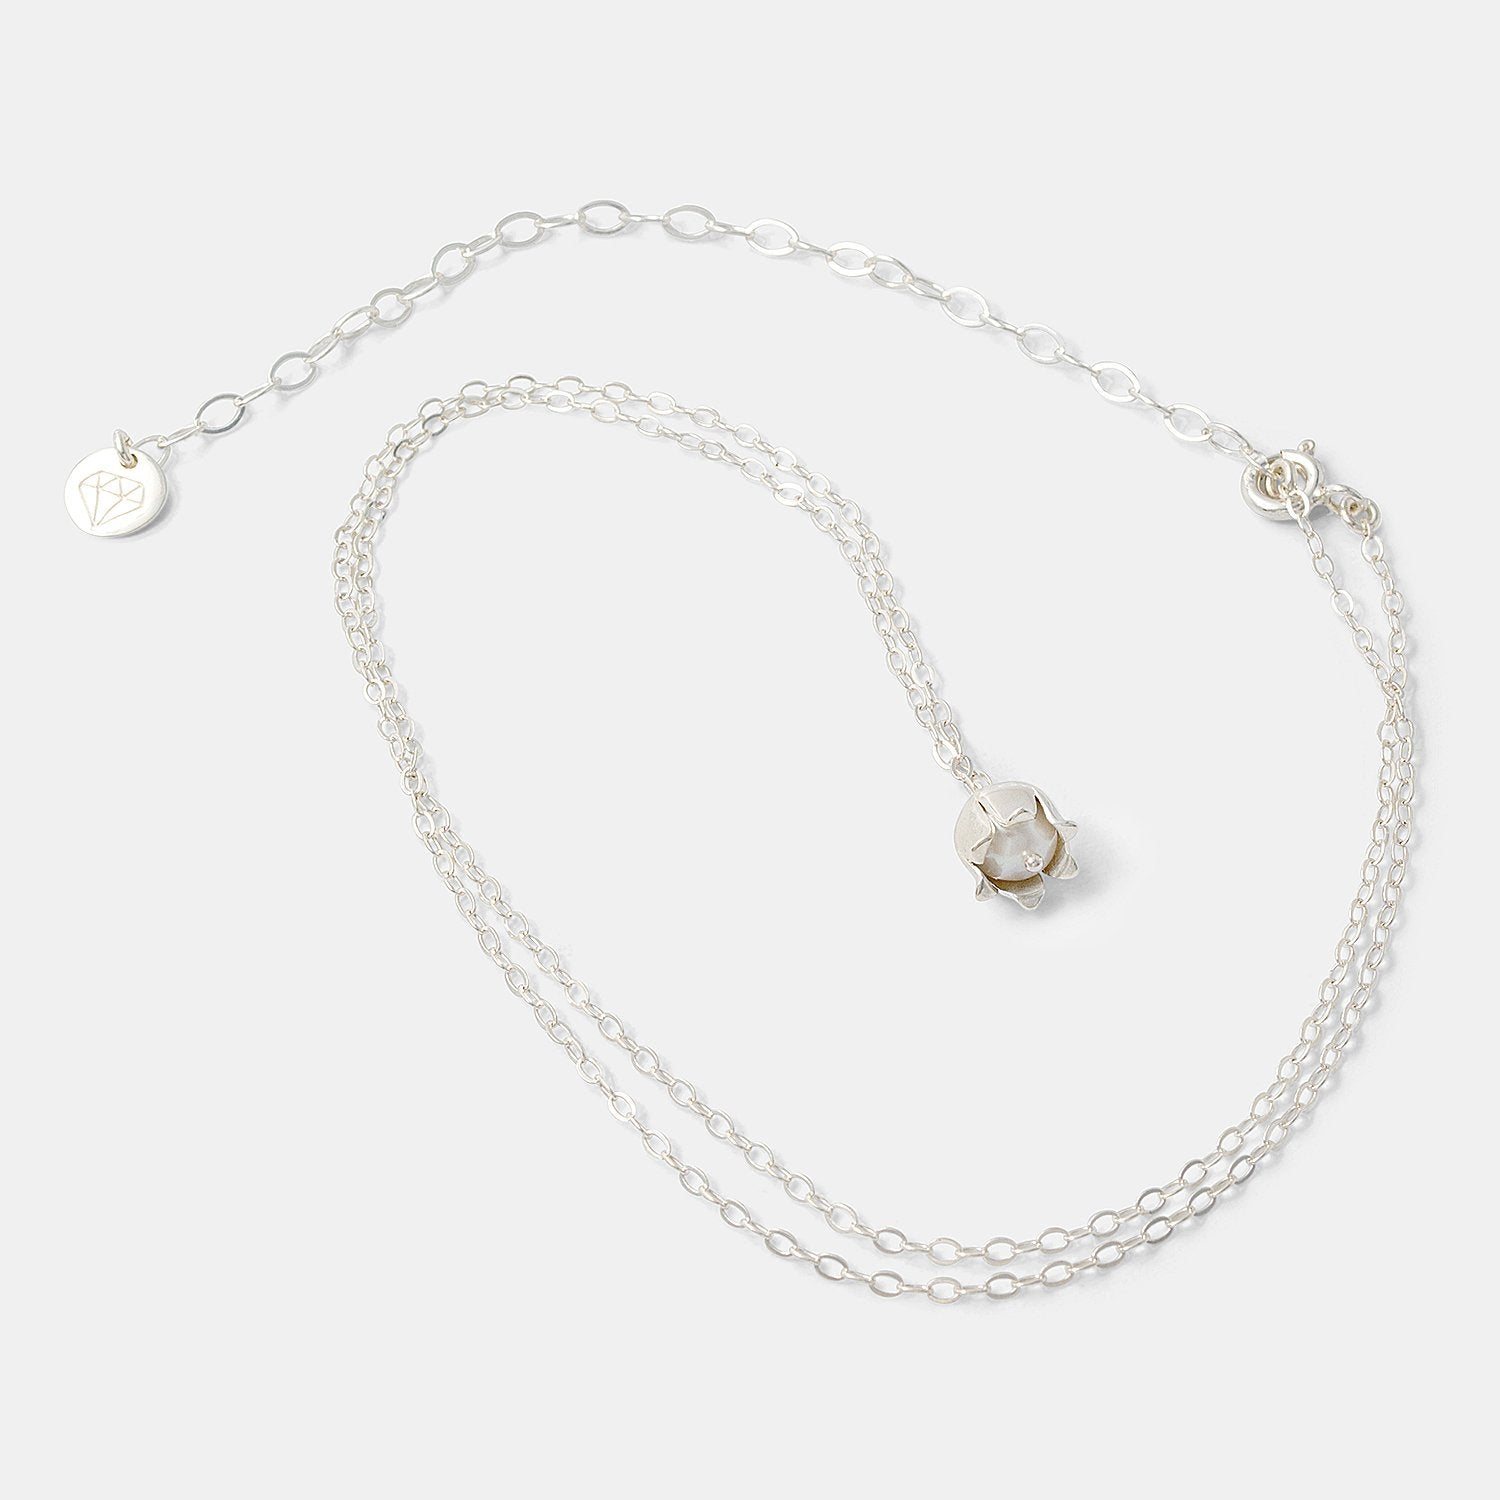 Lily of the valley pendant - Simone Walsh Jewellery Australia